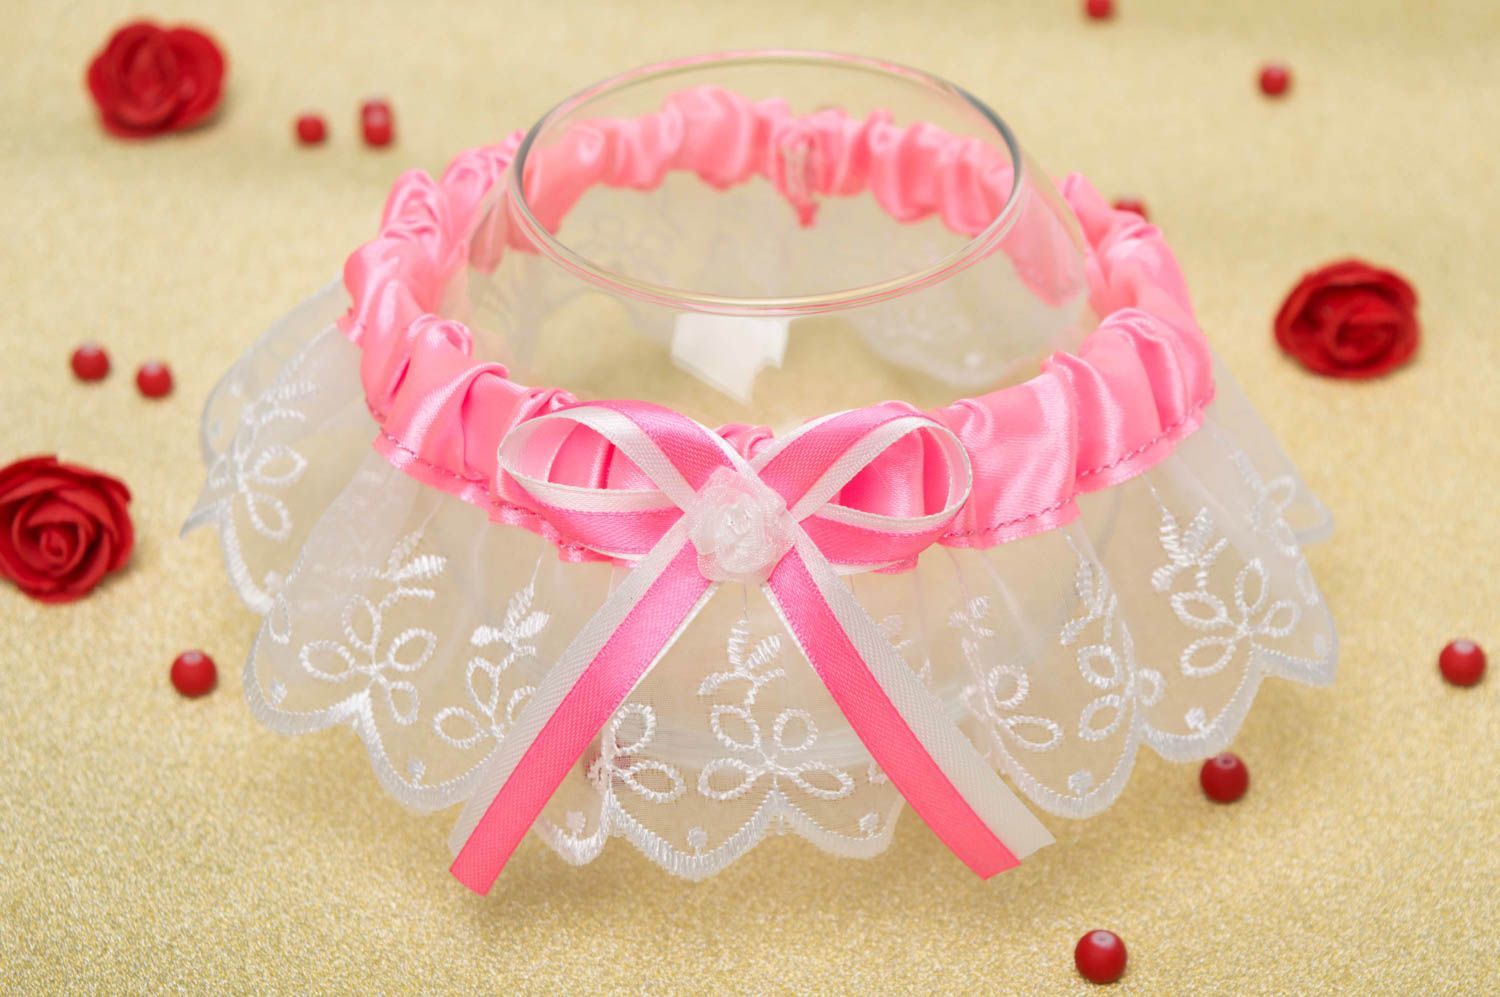 Bright handmade bridal garter lace bridal garter wedding outfit gifts for her photo 1